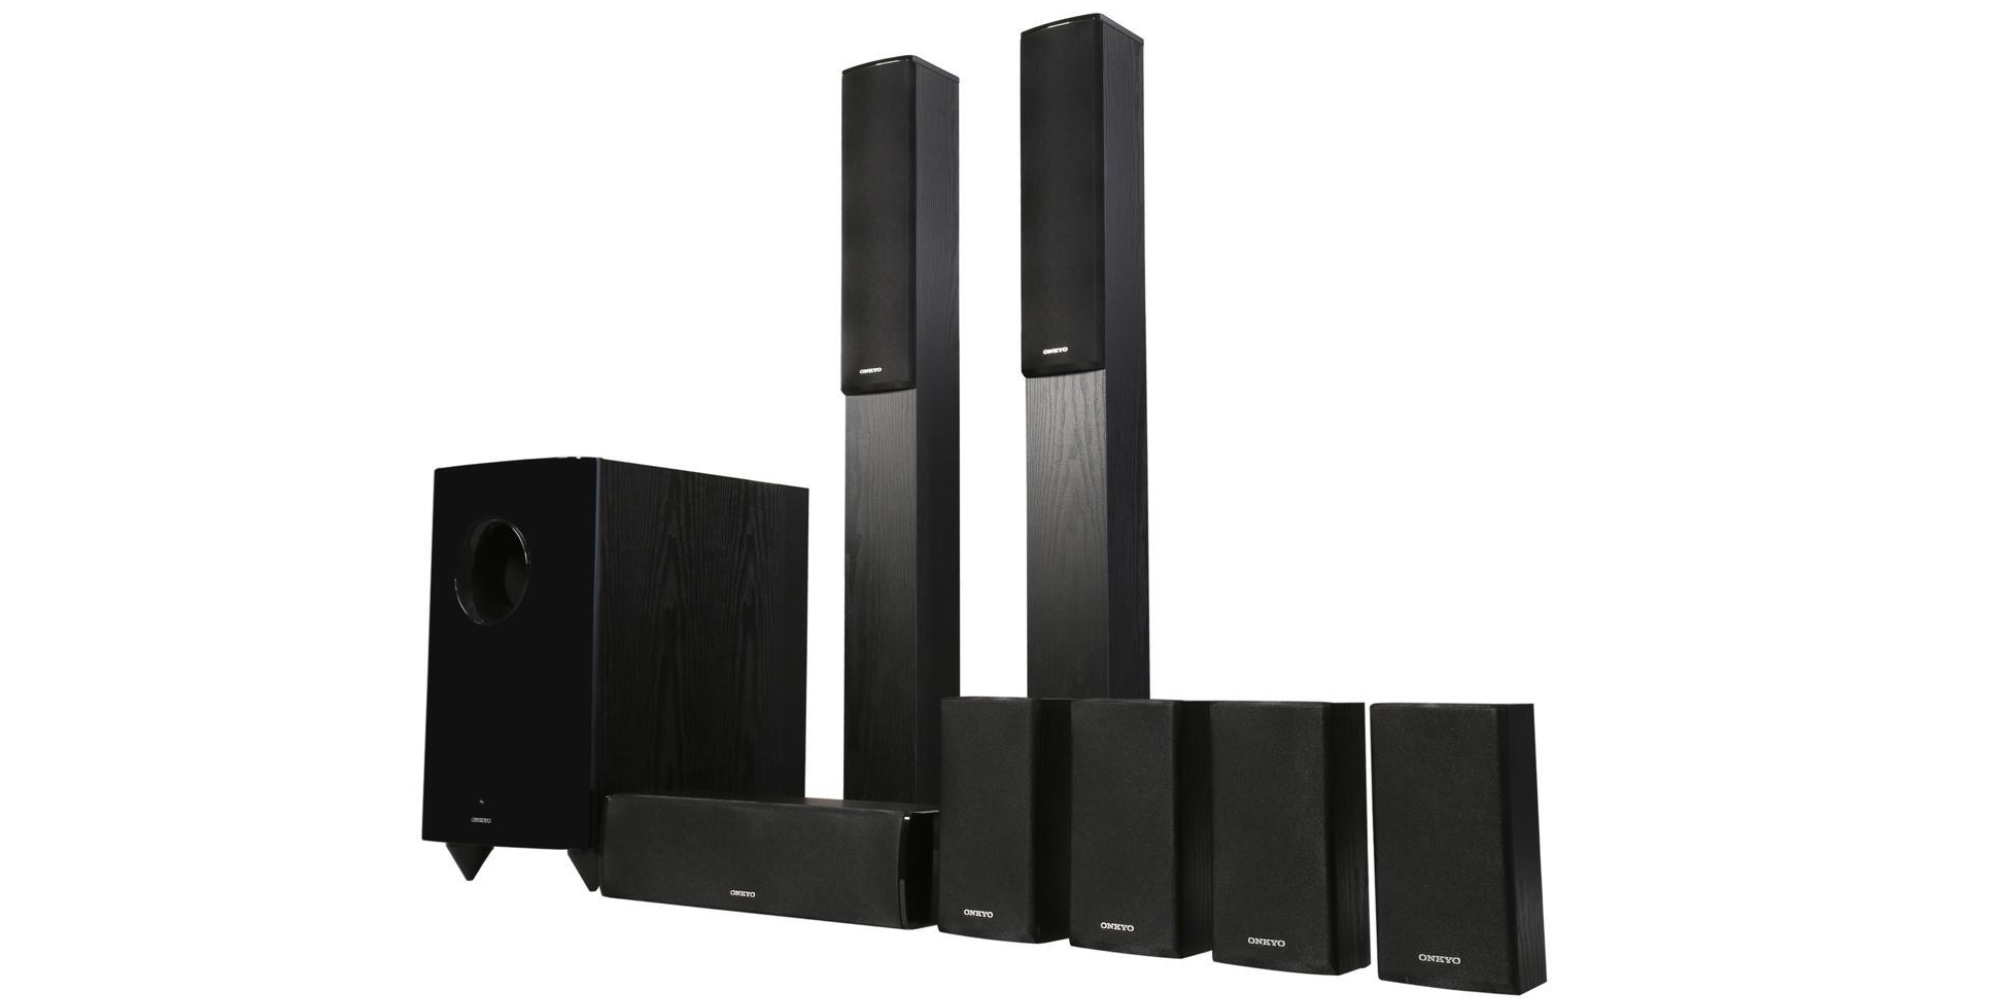 Onkyo S 7 1 Ch System Adds Surround Sound To Your Home Theater 265 38 Off 9to5toys